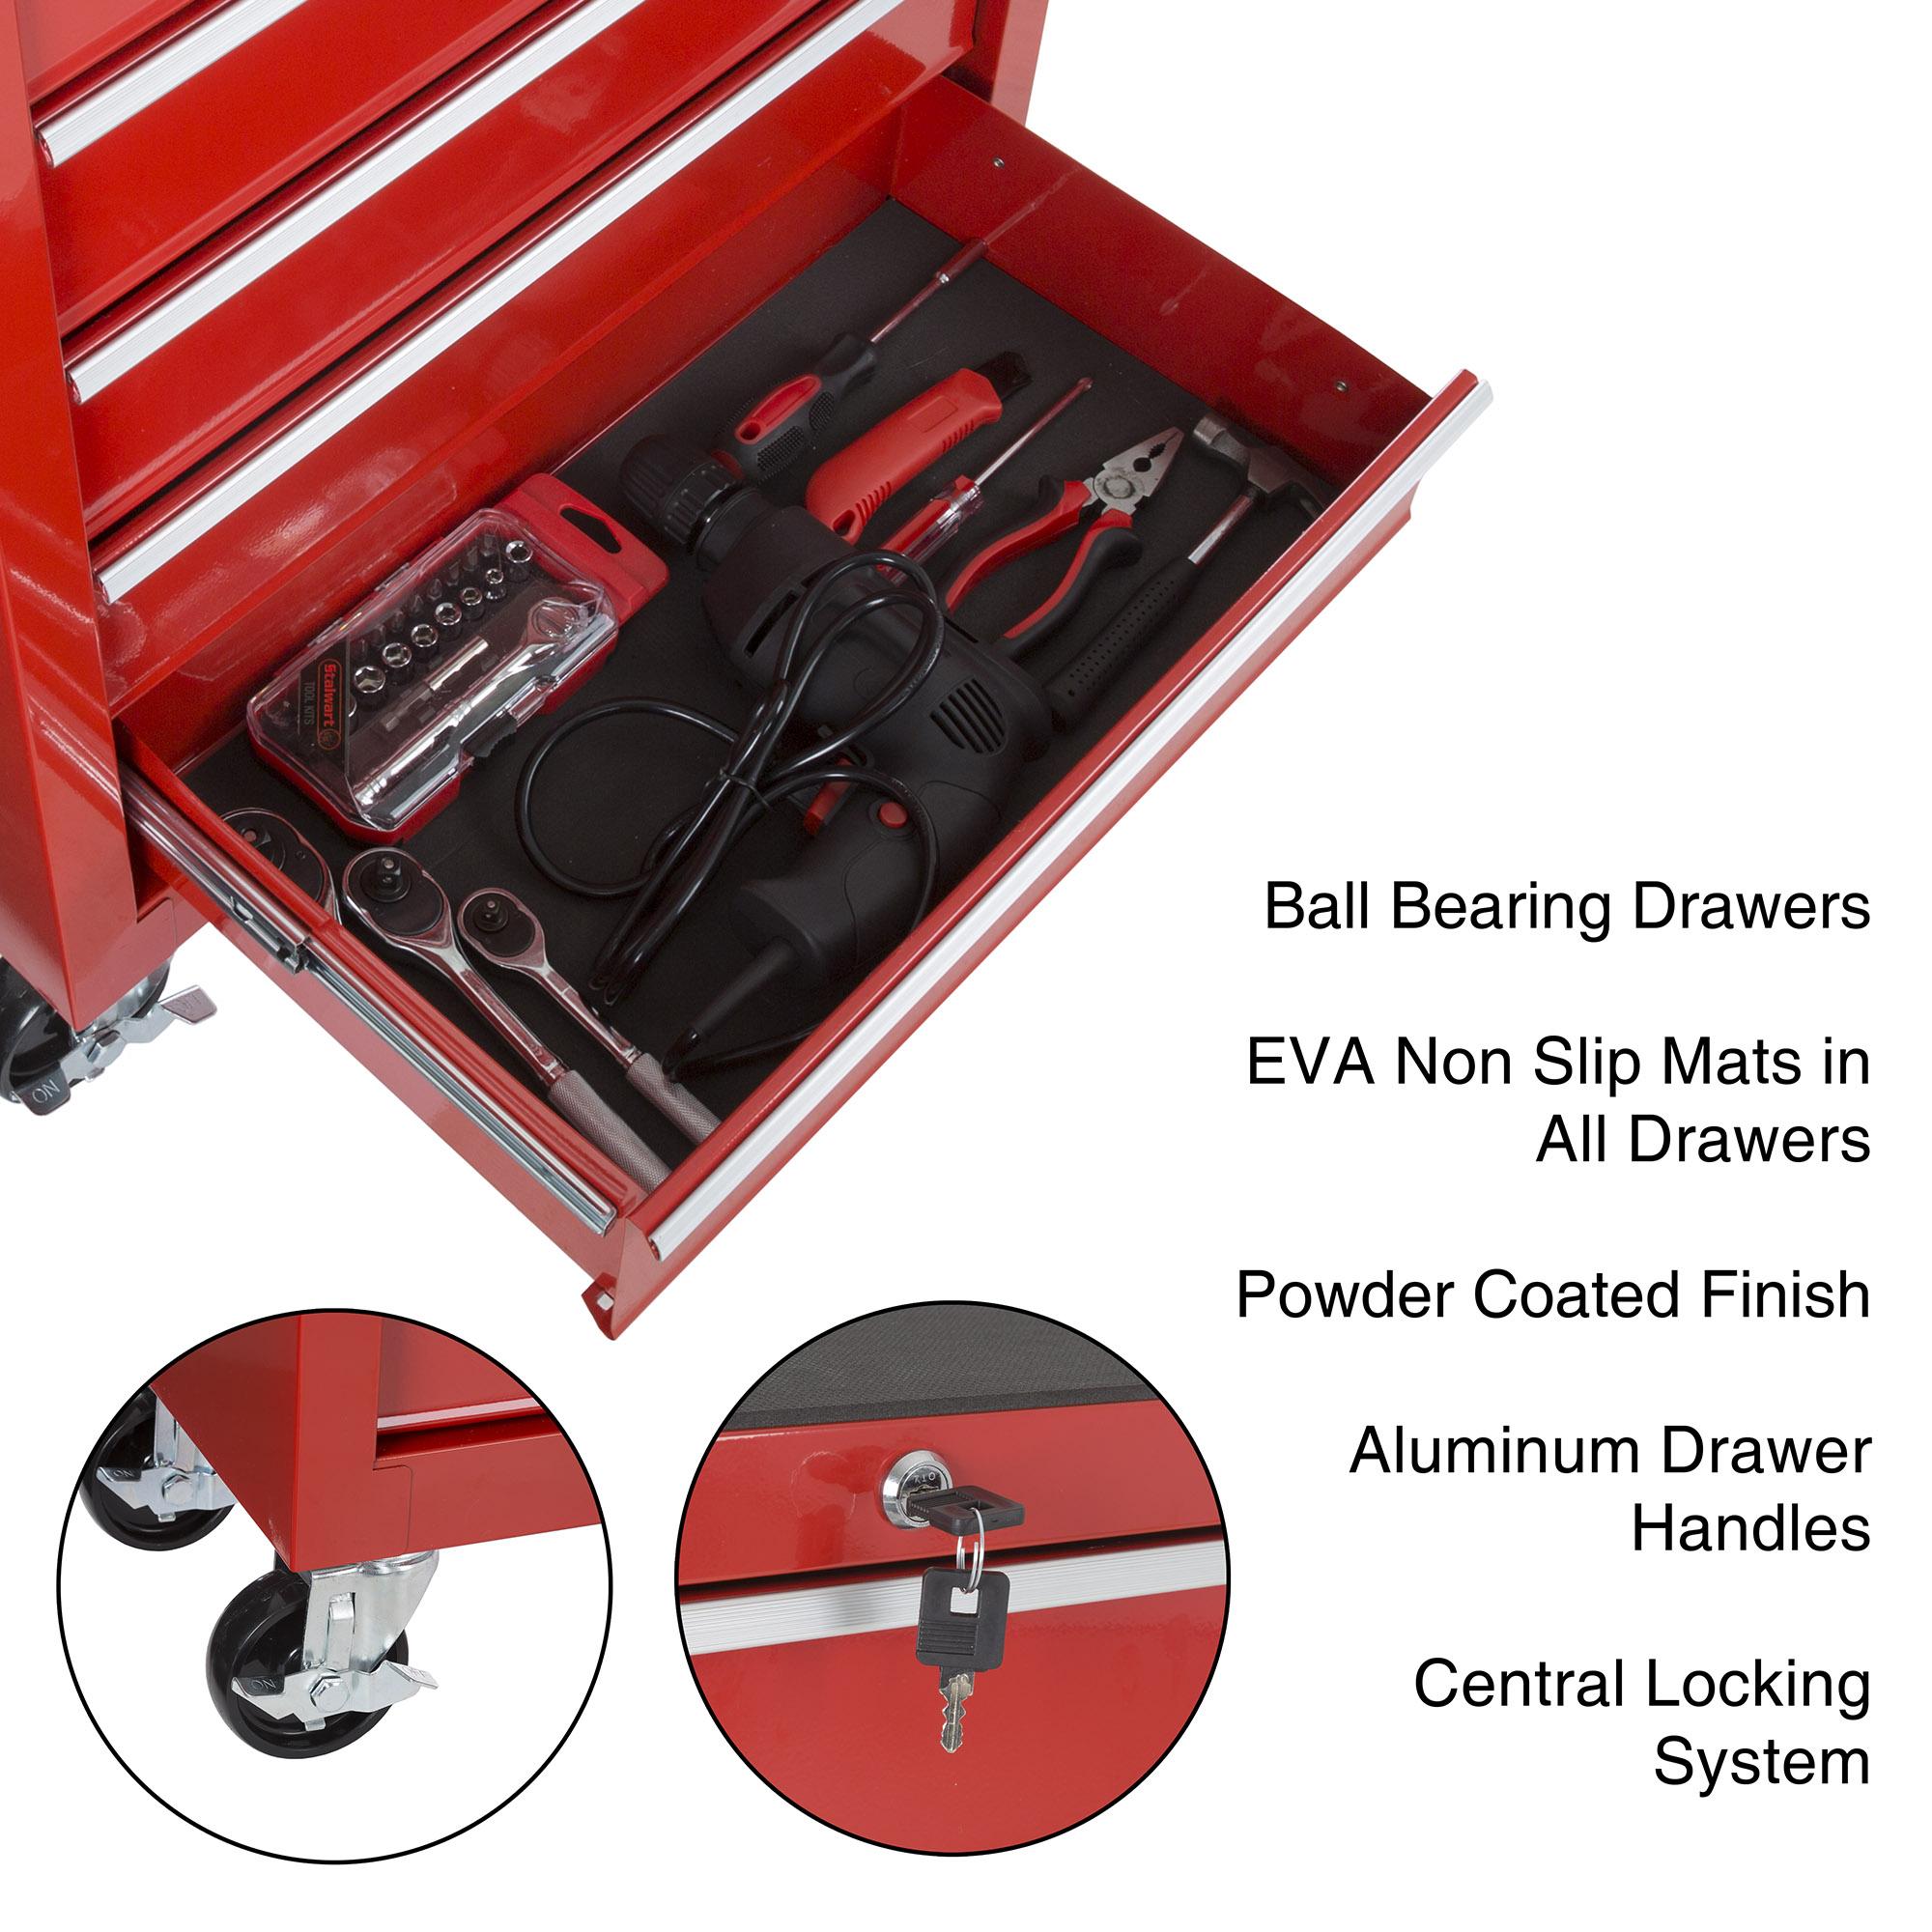 Rolling Tool Box Cabinet, 5 Drawer Portable Storage Chest Tools Organizer With Wheels, Ball Bearing Locking and Sliding Drawers By Stalwart (Red) - image 3 of 4